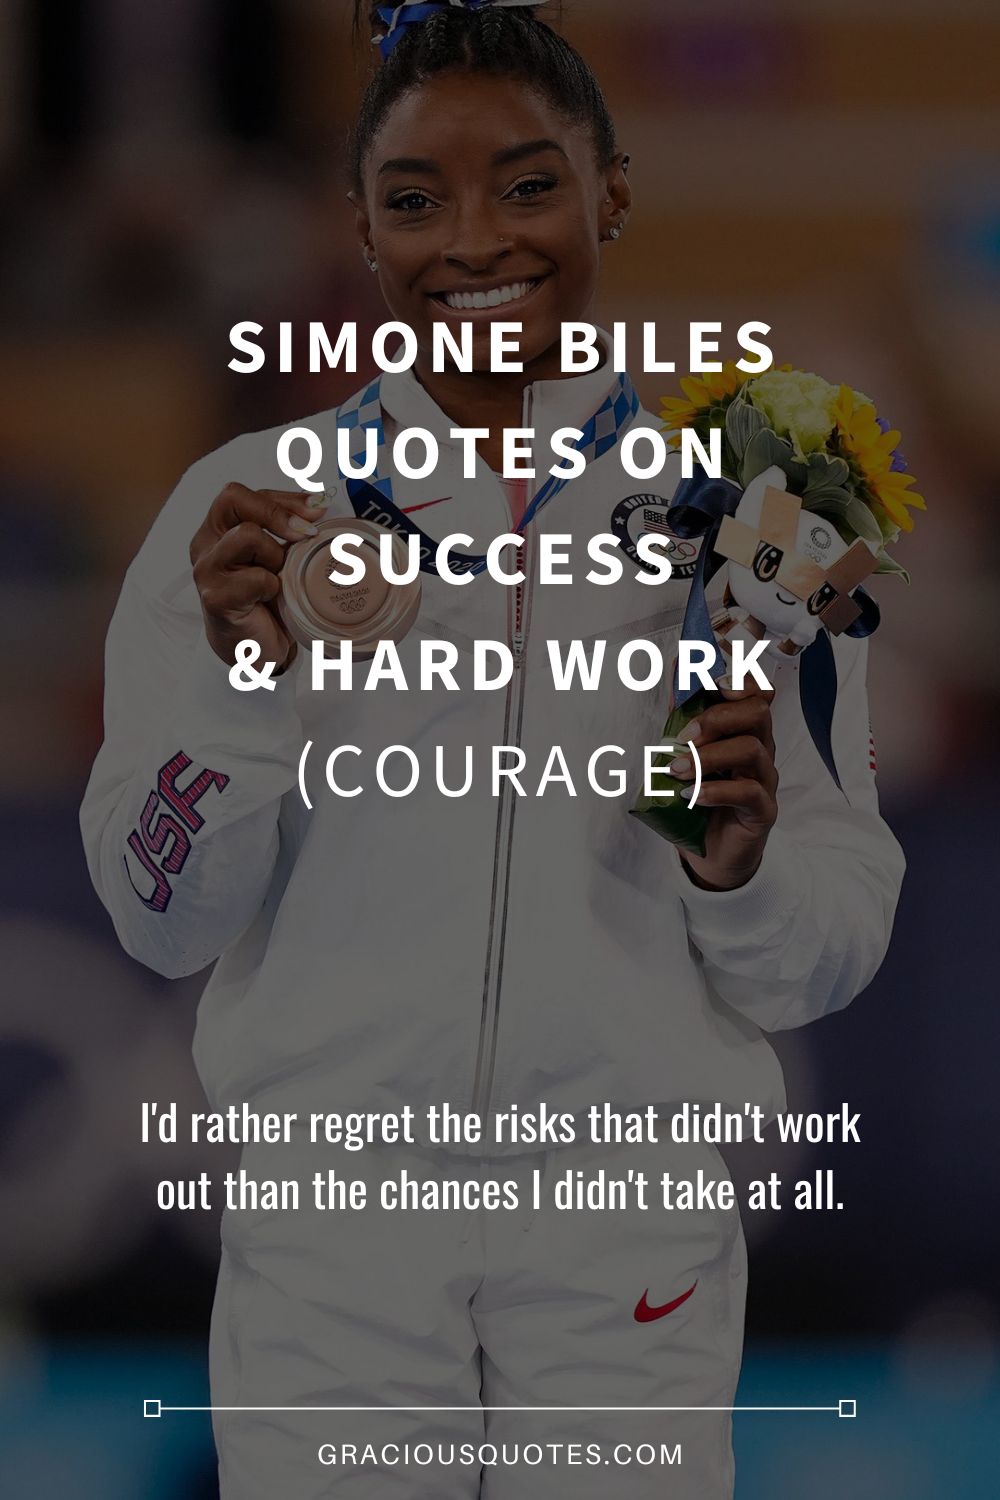 Simone Biles Quotes on Success & Hard Work (COURAGE) - Gracious Quotes